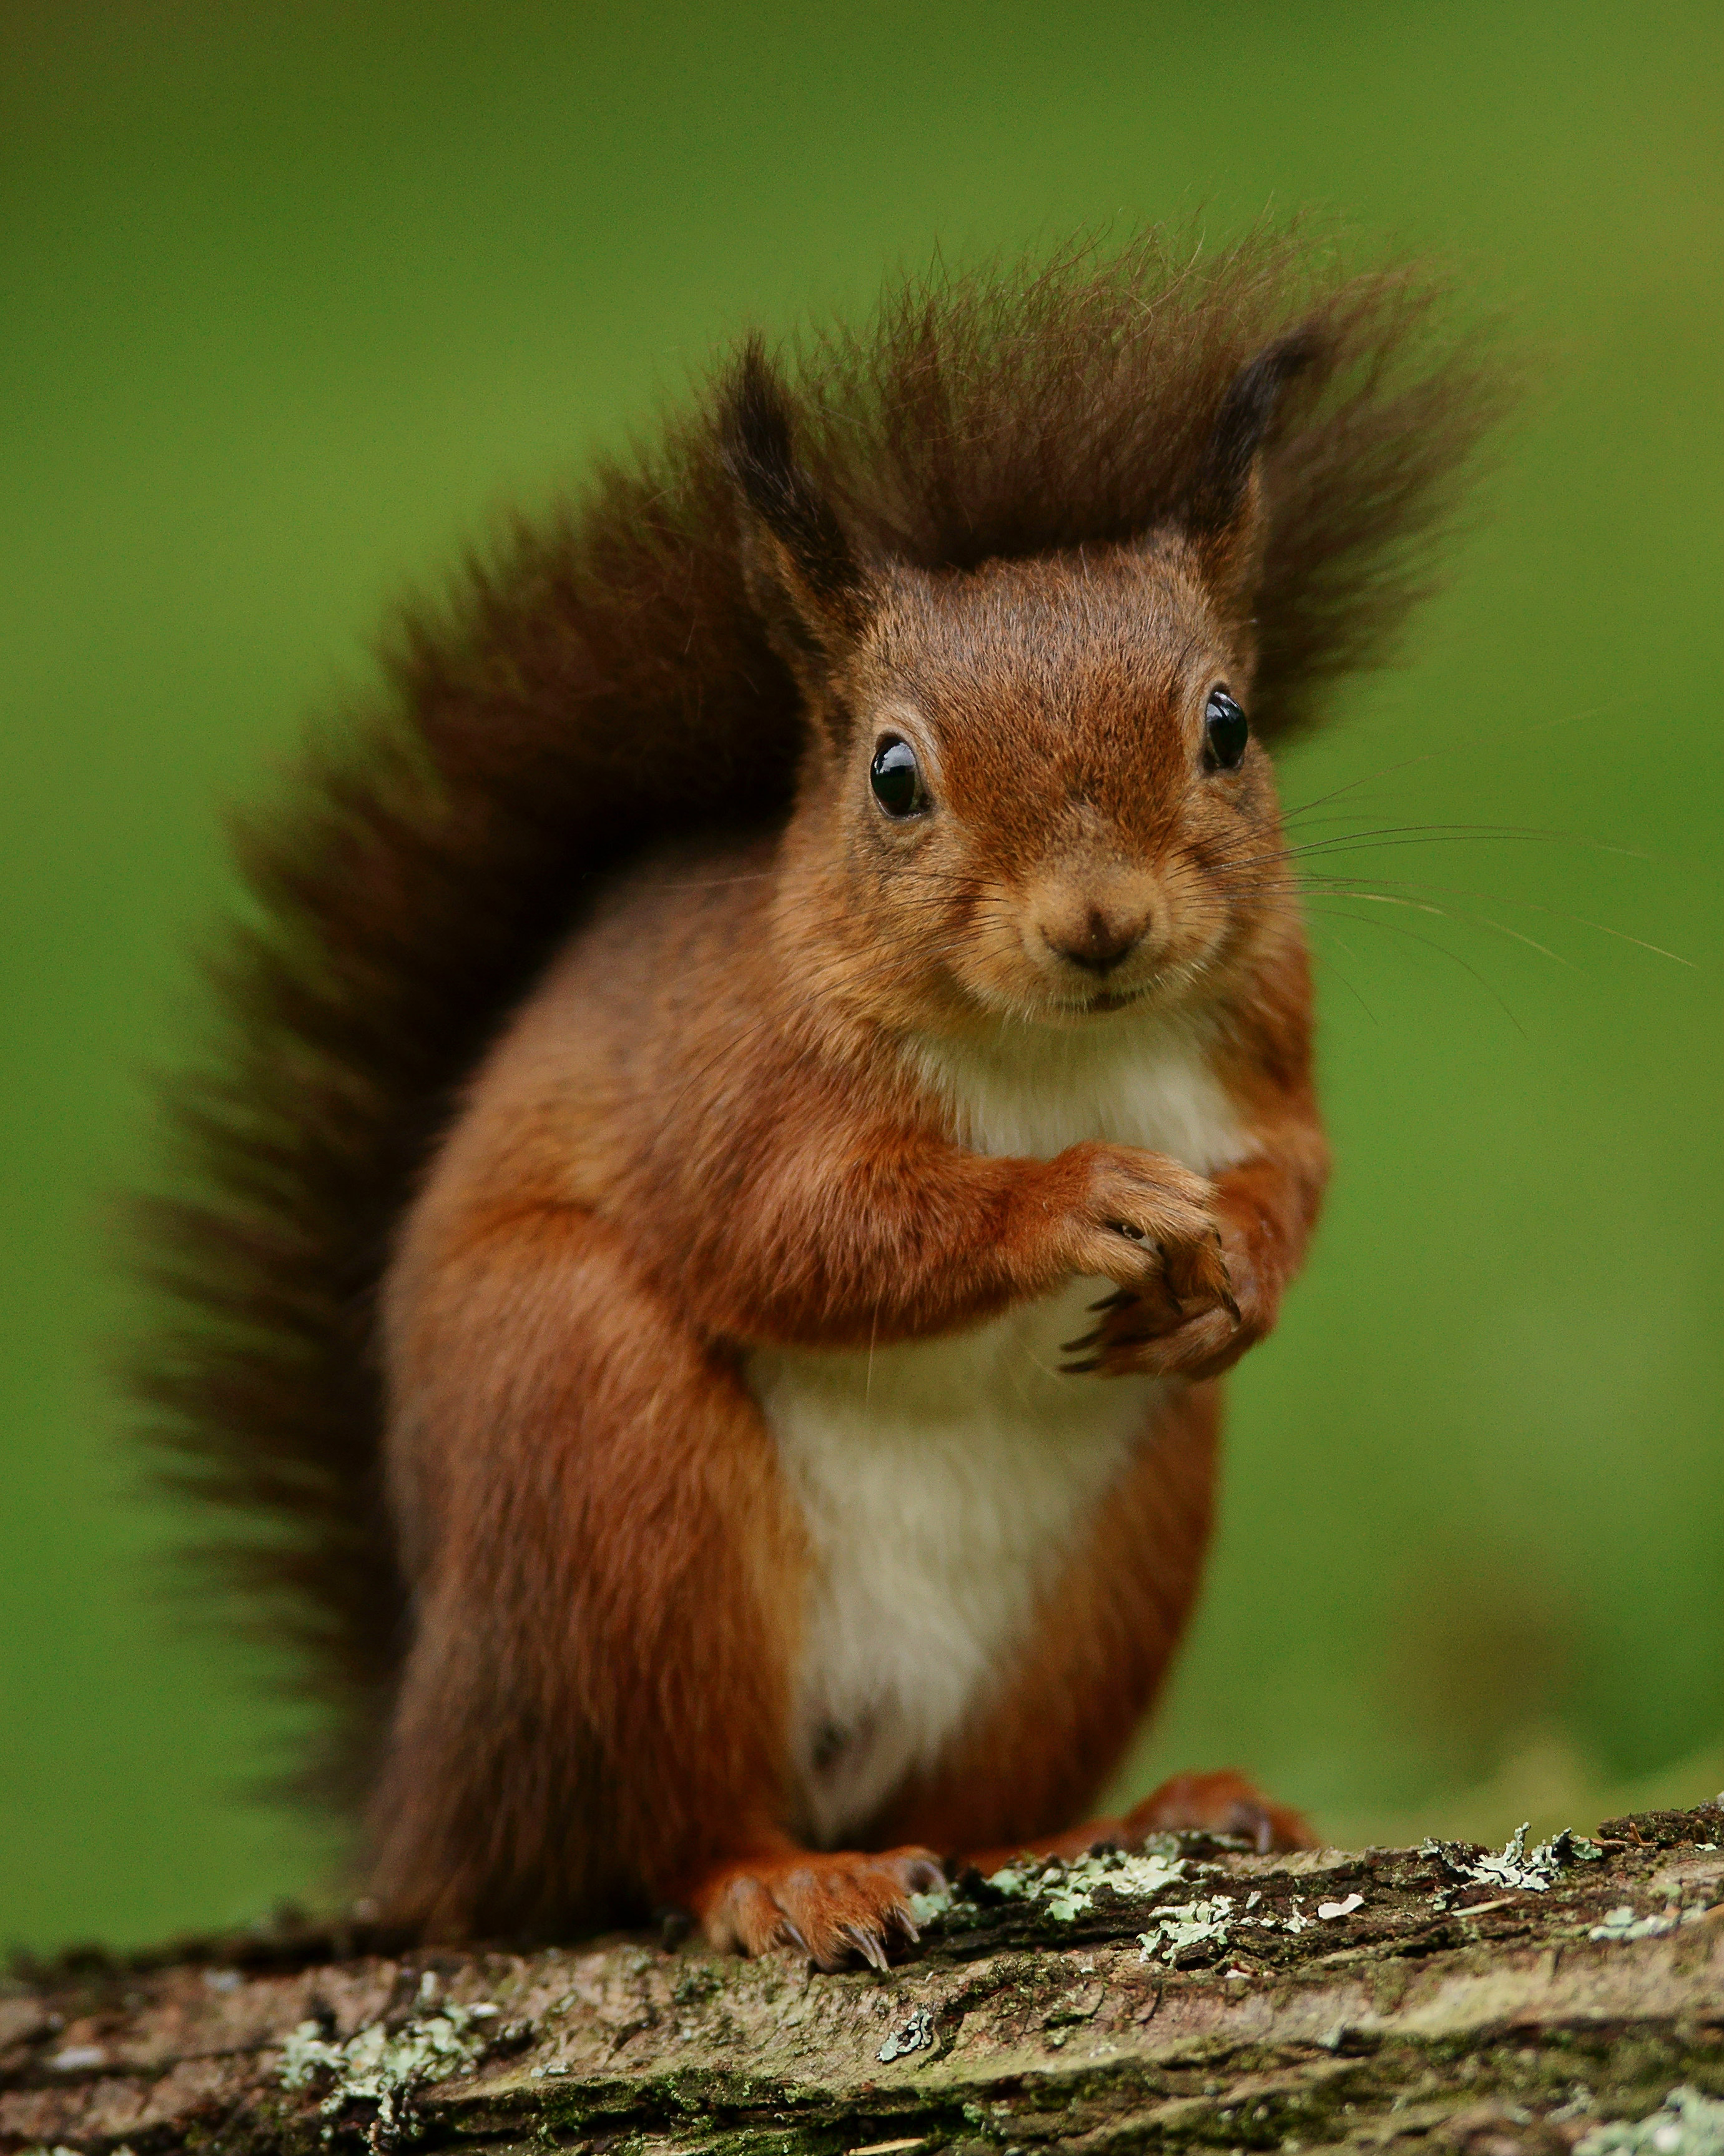 New Lock Screen Wallpapers squirrel, animals, funny, fluffy, rodent